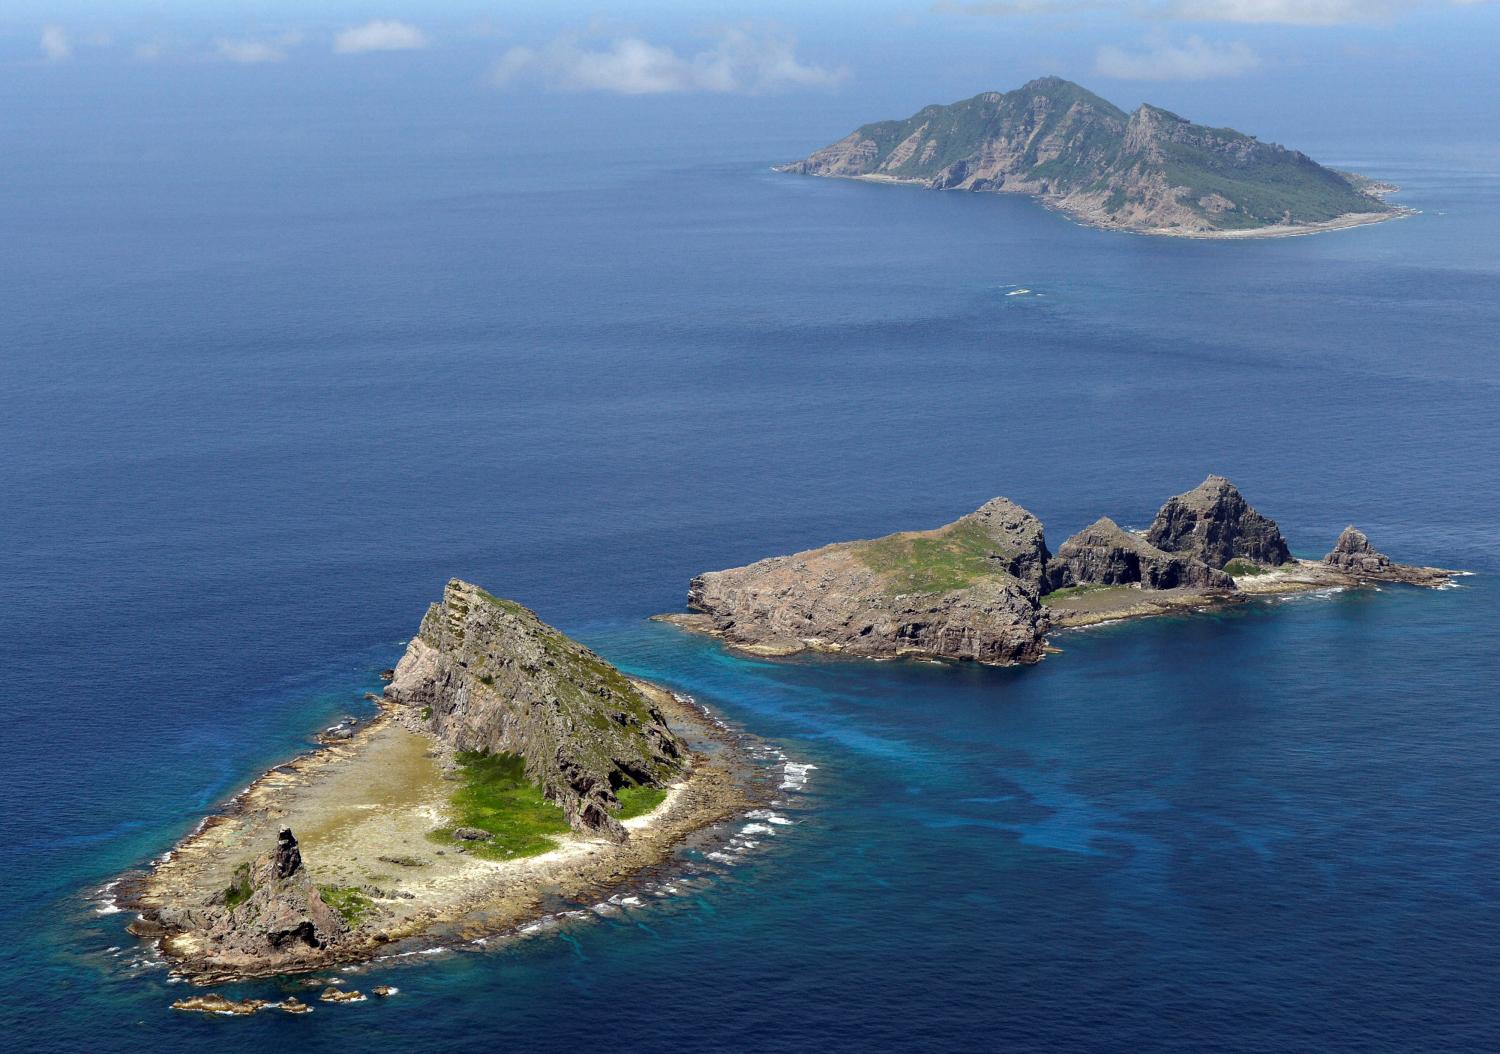 FILE PHOTO - A group of disputed islands, Uotsuri island (top), Minamikojima (bottom) and Kitakojima, known as Senkaku in Japan and Diaoyu in China is seen in the East China Sea, in this photo taken by Kyodo September 2012.  Mandatory credit. REUTERS/Kyodo/File Photo    ATTENTION EDITORS - FOR EDITORIAL USE ONLY. NOT FOR SALE FOR MARKETING OR ADVERTISING CAMPAIGNS. THIS IMAGE HAS BEEN SUPPLIED BY A THIRD PARTY. IT IS DISTRIBUTED, EXACTLY AS RECEIVED BY REUTERS, AS A SERVICE TO CLIENTS. MANDATORY CREDIT. JAPAN OUT. NO COMMERCIAL OR EDITORIAL SALES IN JAPAN         - S1AETIVBNCAA